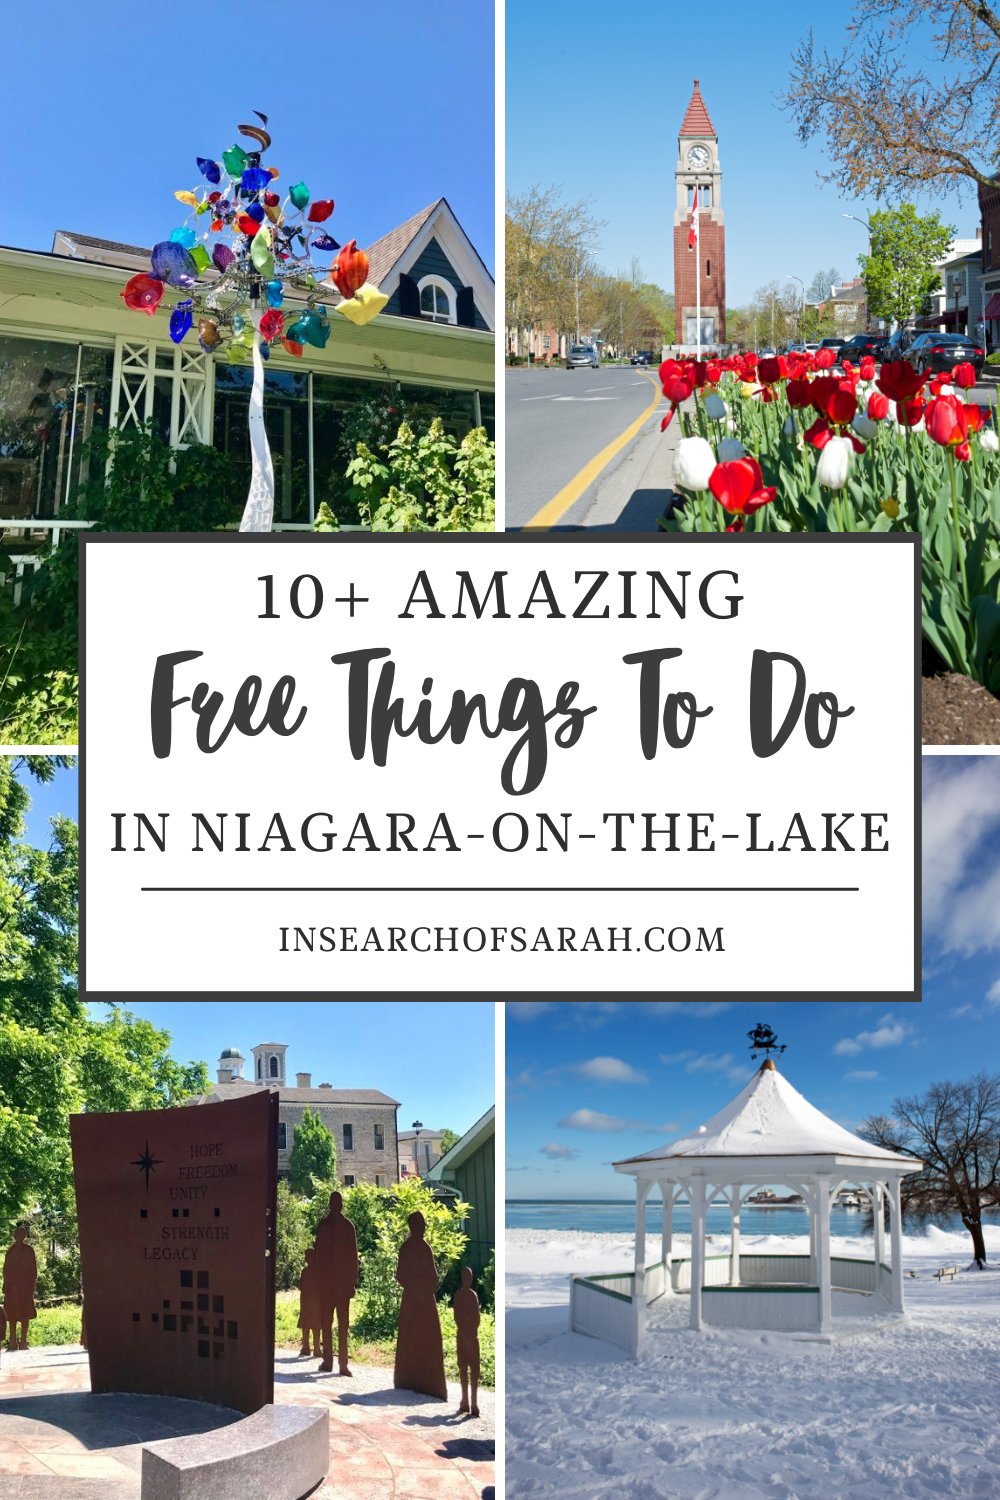 free things to do in niagara-on-the-lake